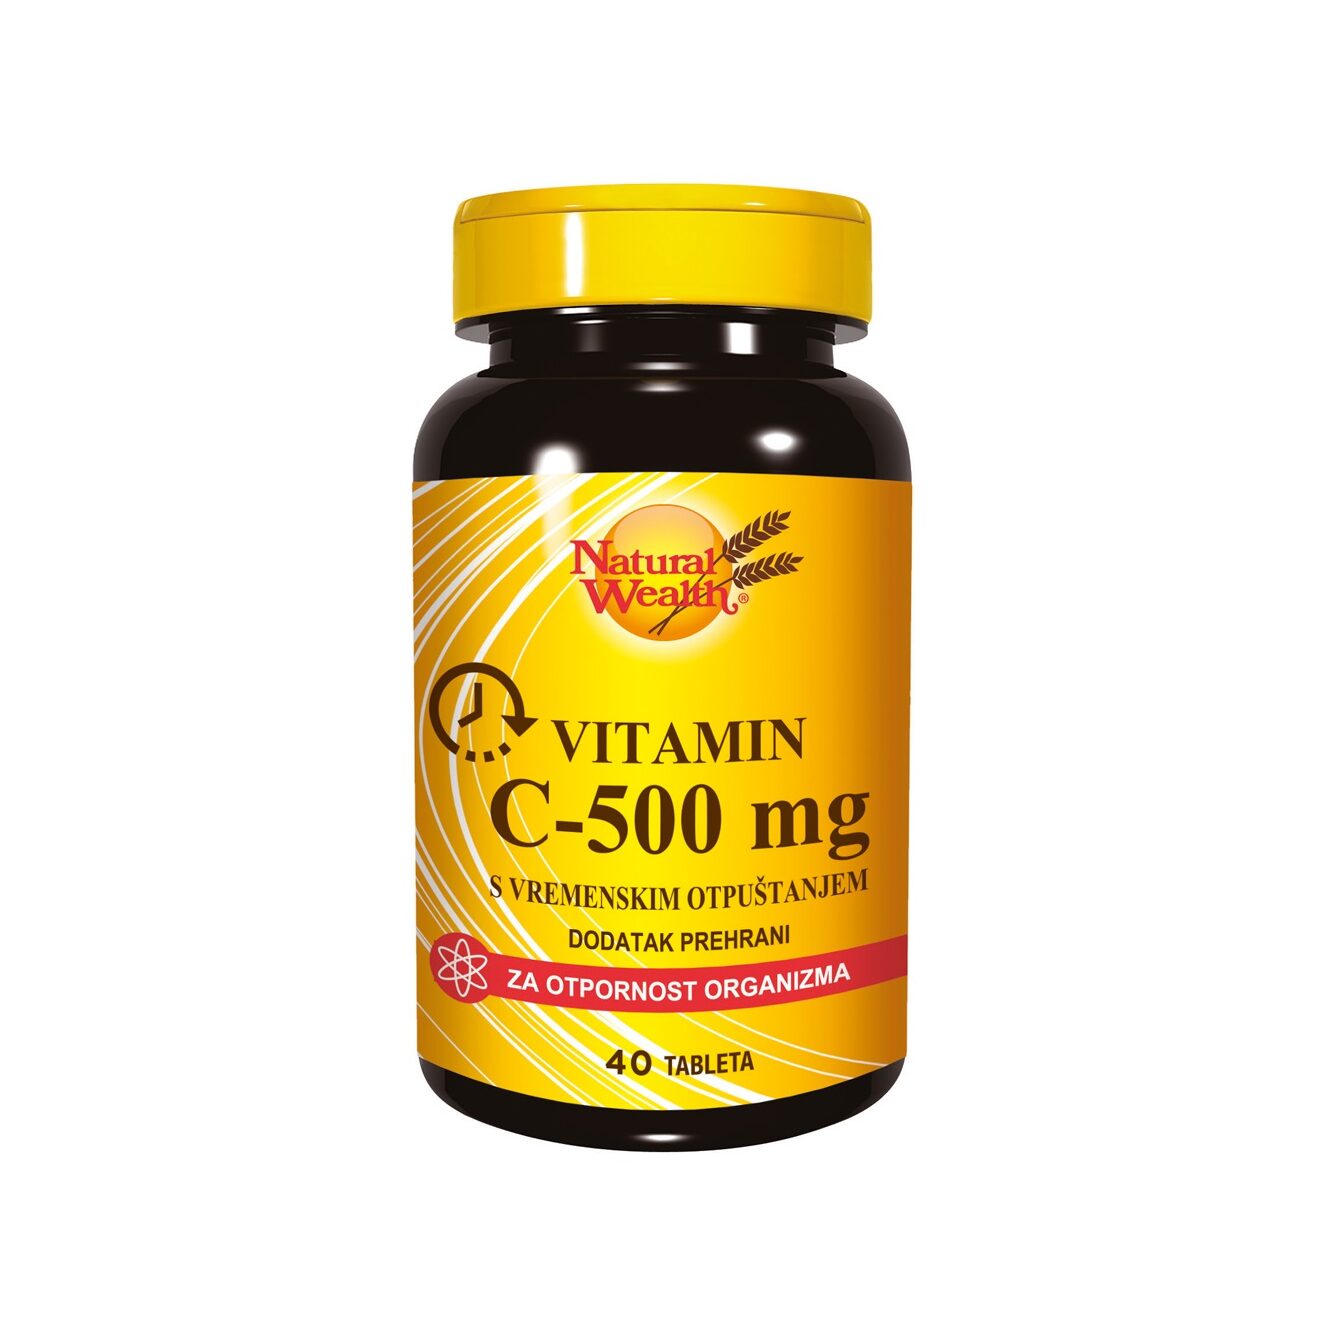 NATURAL WEALTH VITAMIN C-500 TABLETE A40